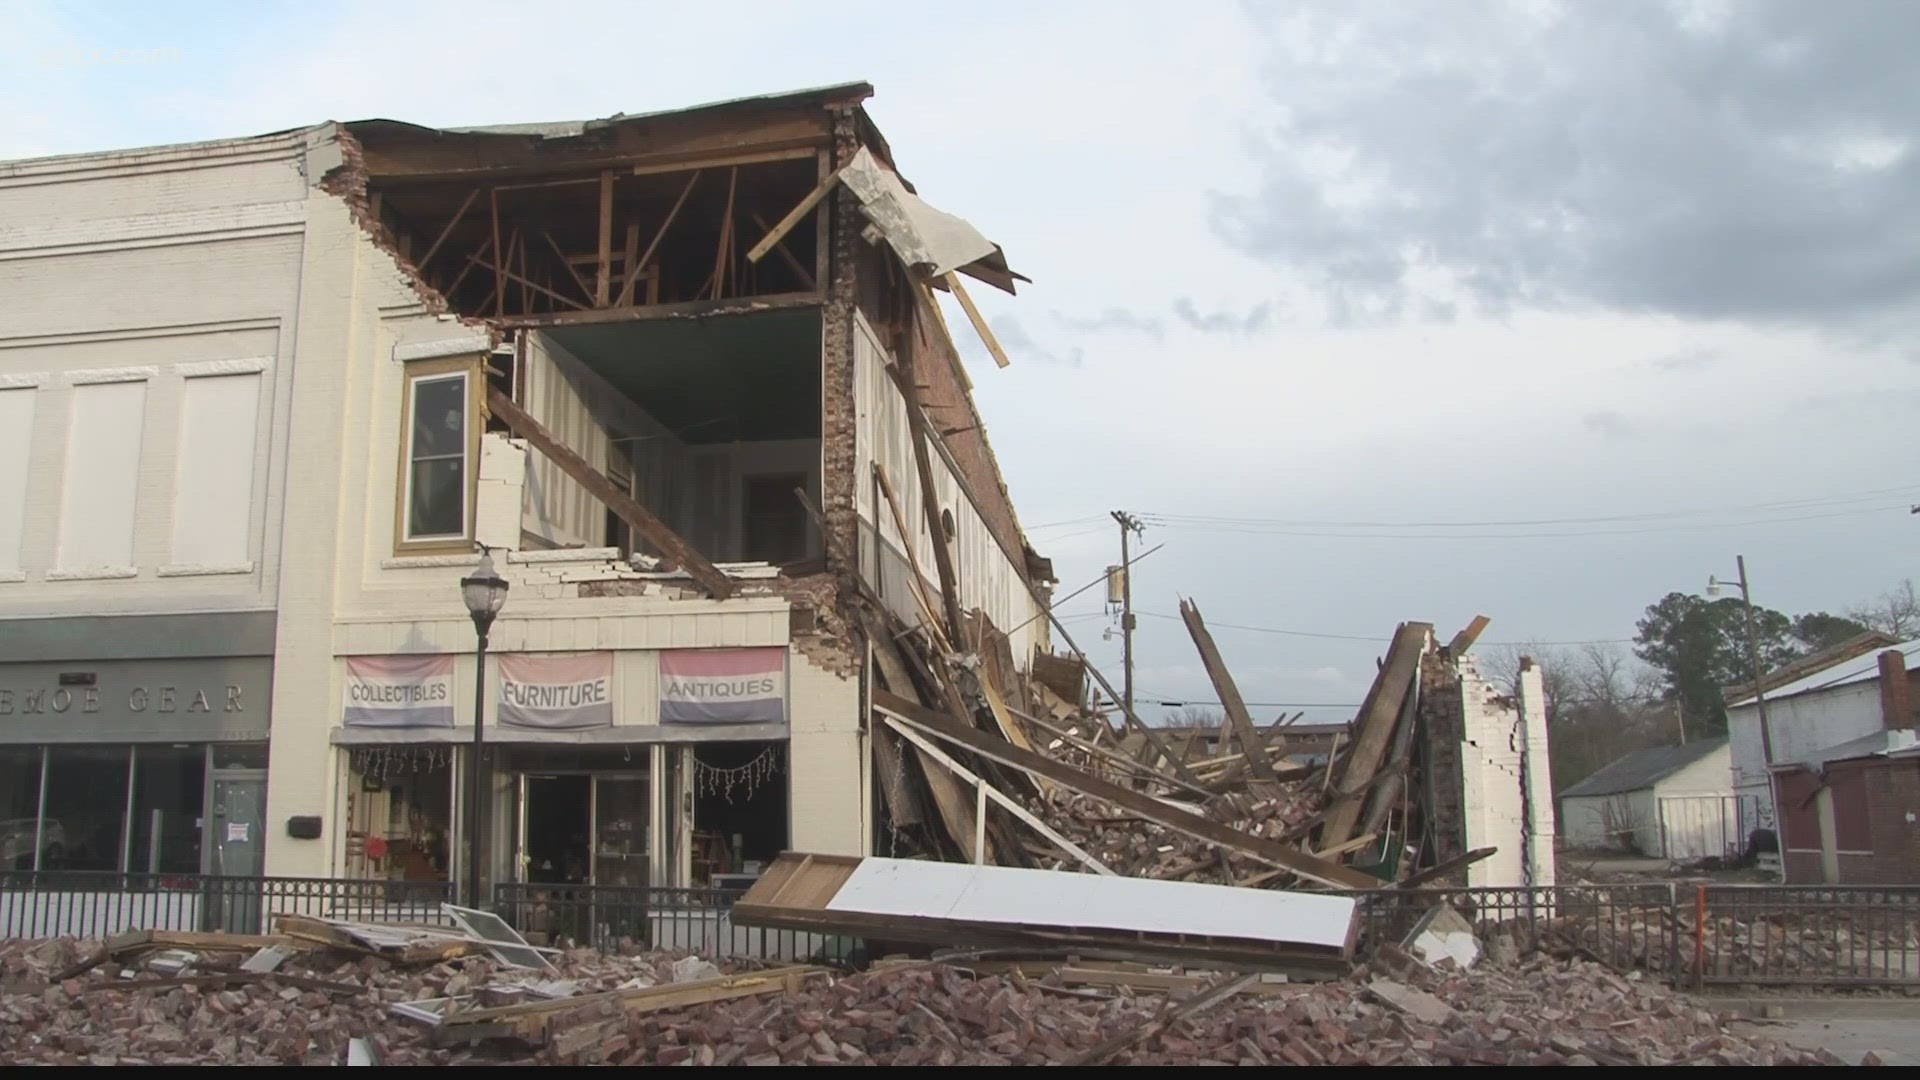 The county reports over $4 million in damage as a result of the tornado last. Still, they're told the federal government won't step in to help.